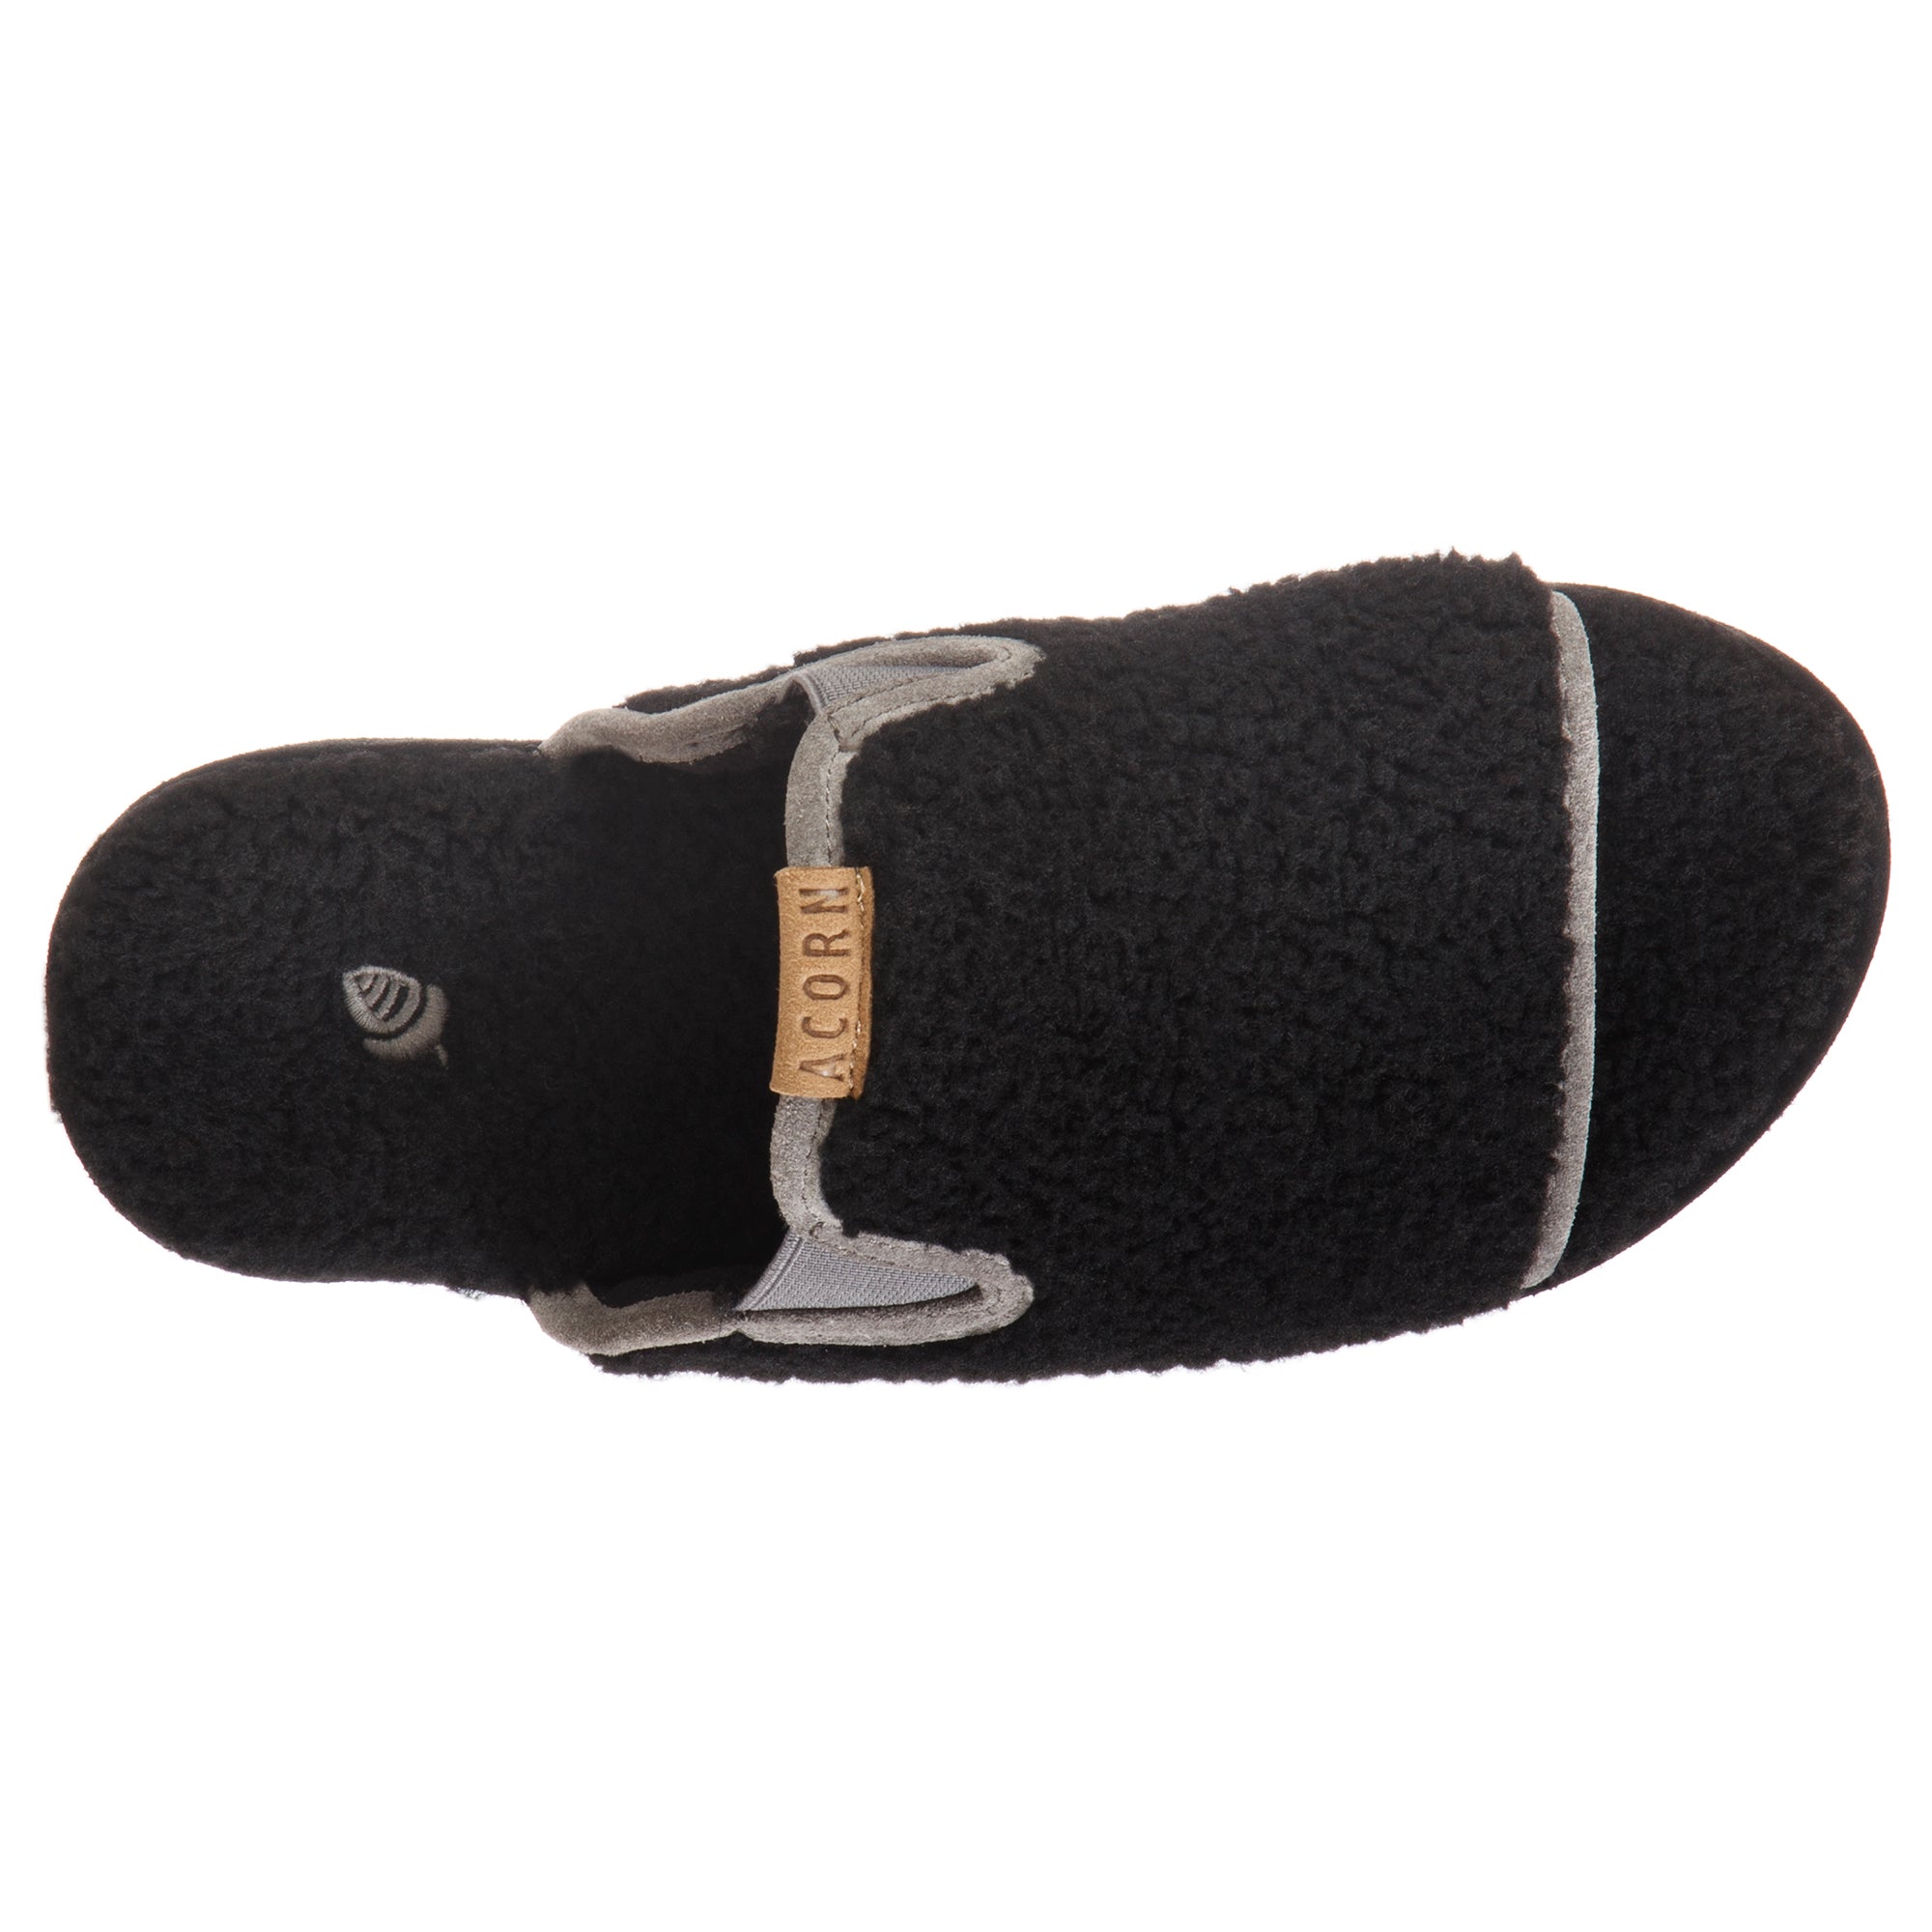 Women's Recycled Harbor Slide with Cloud Cushion® Comfort.